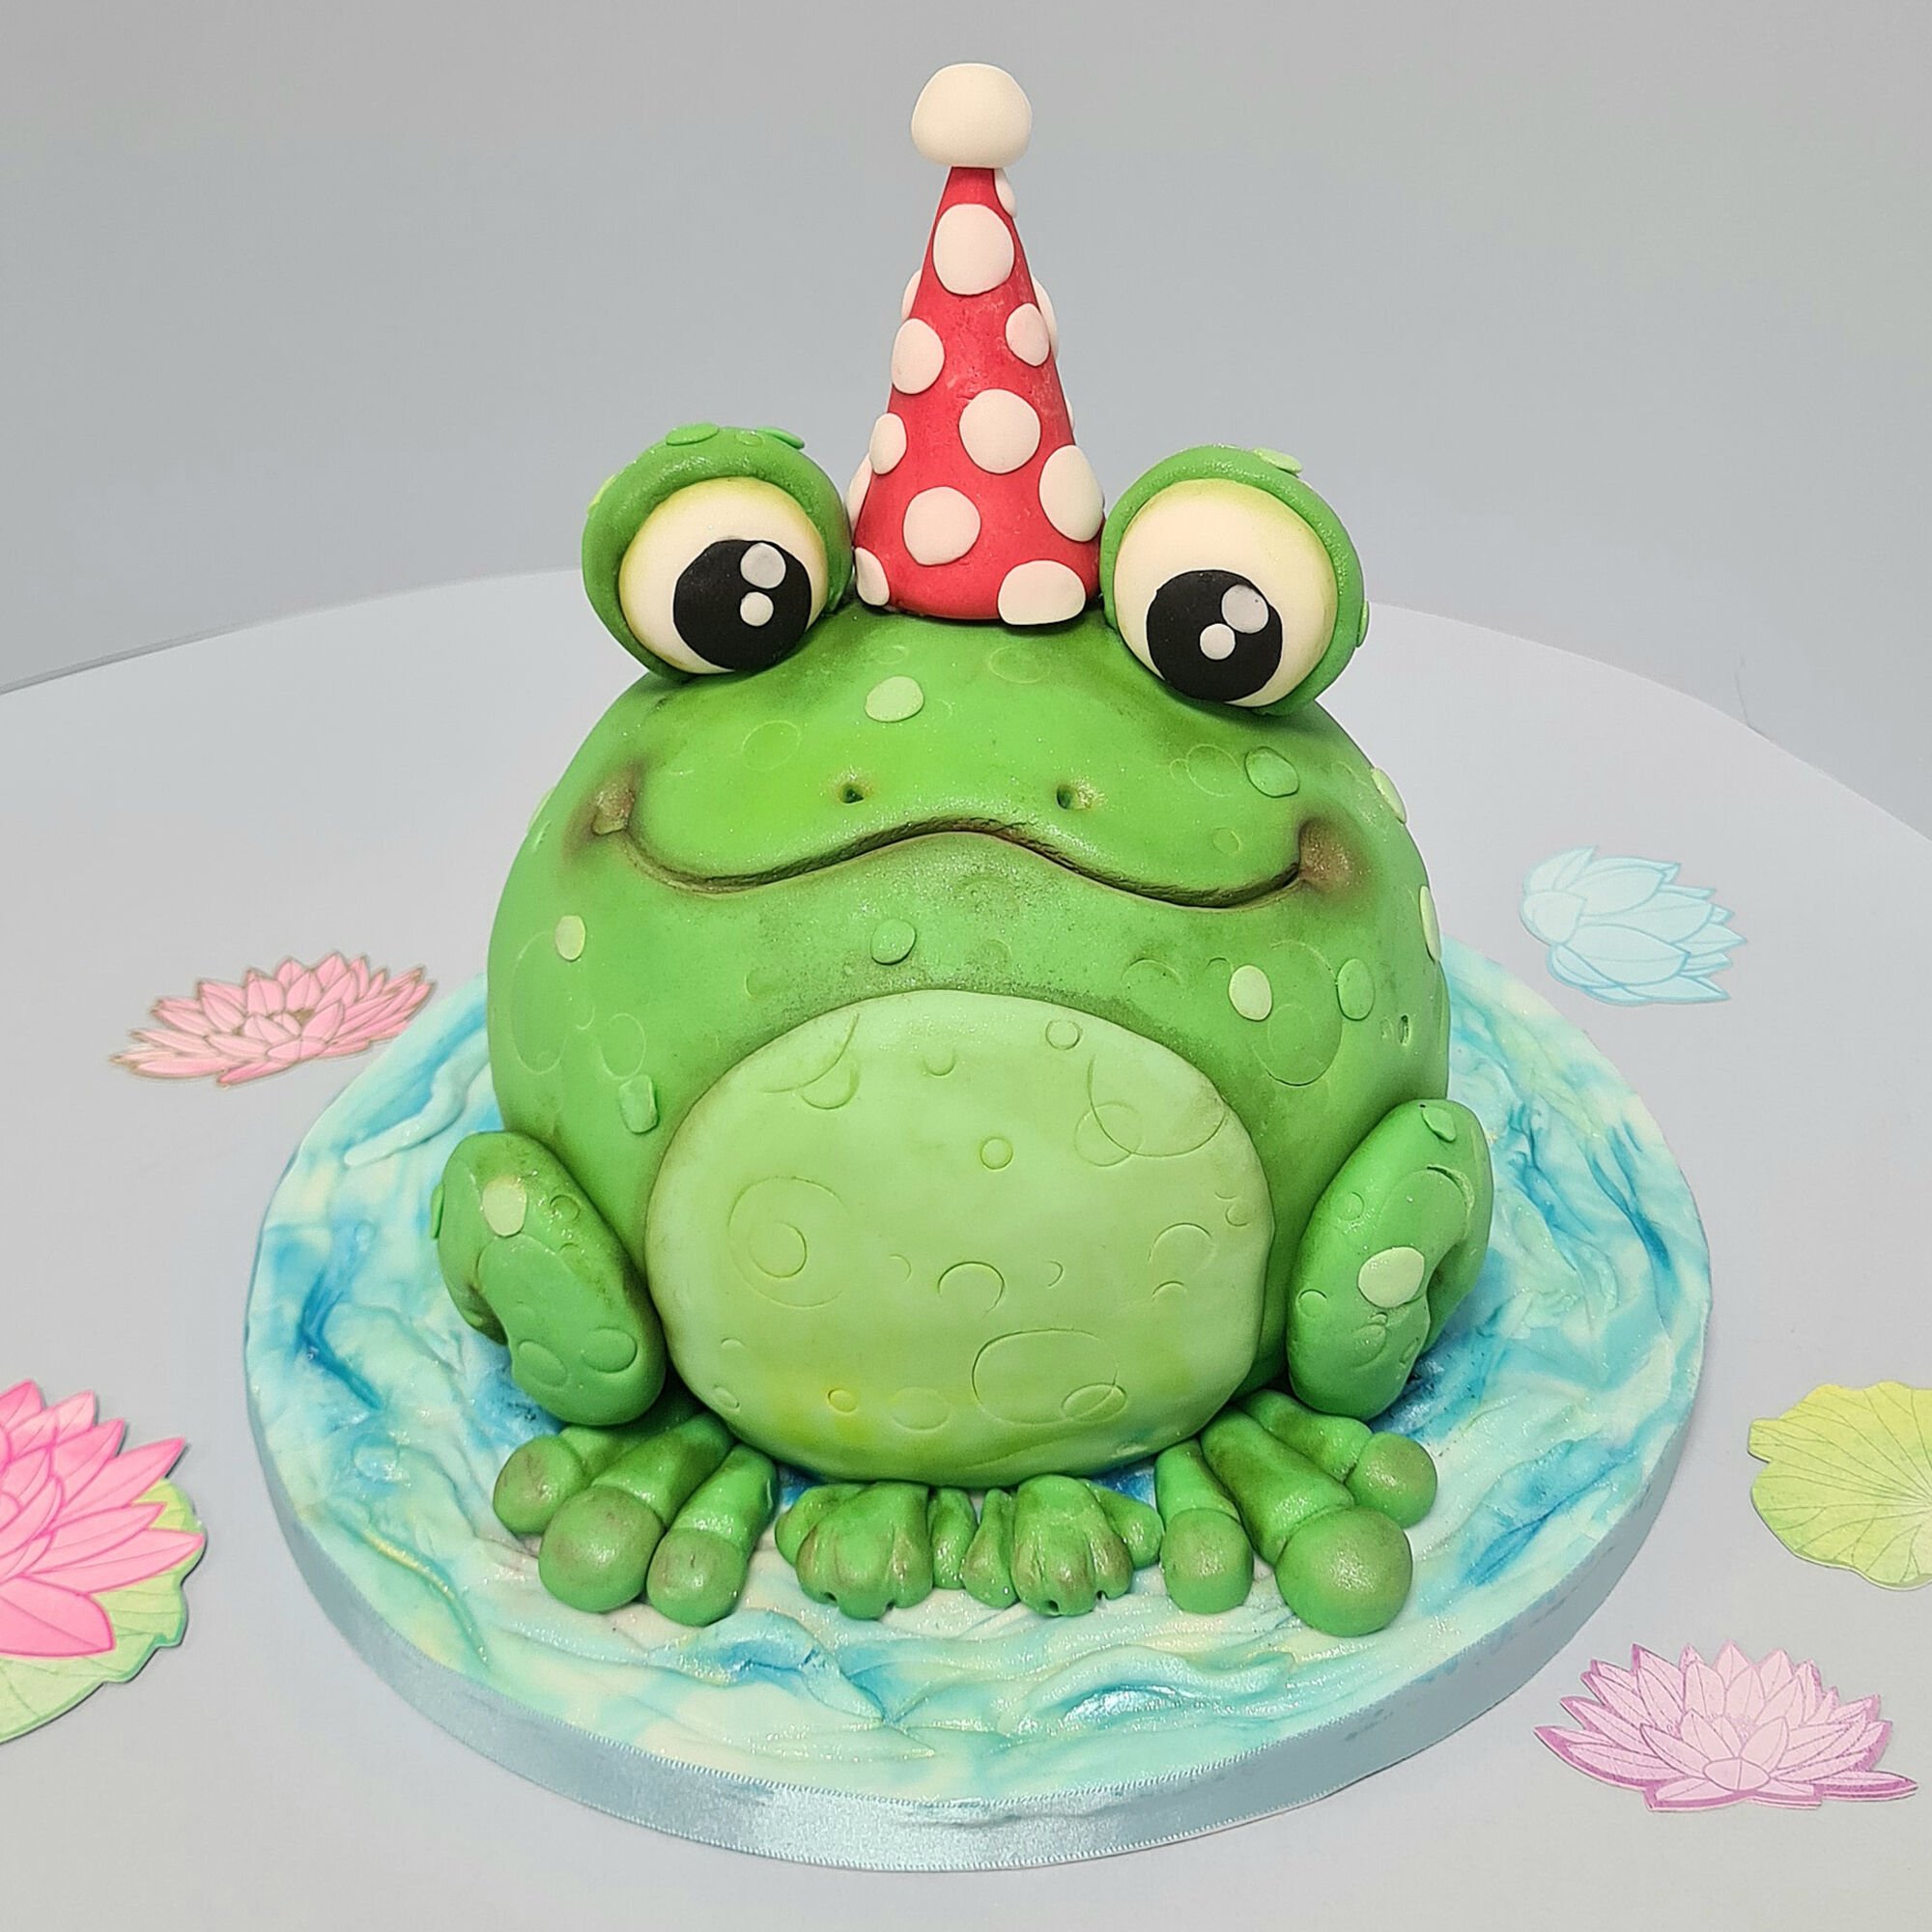 How to Make a Frog Cake | Hobbycraft